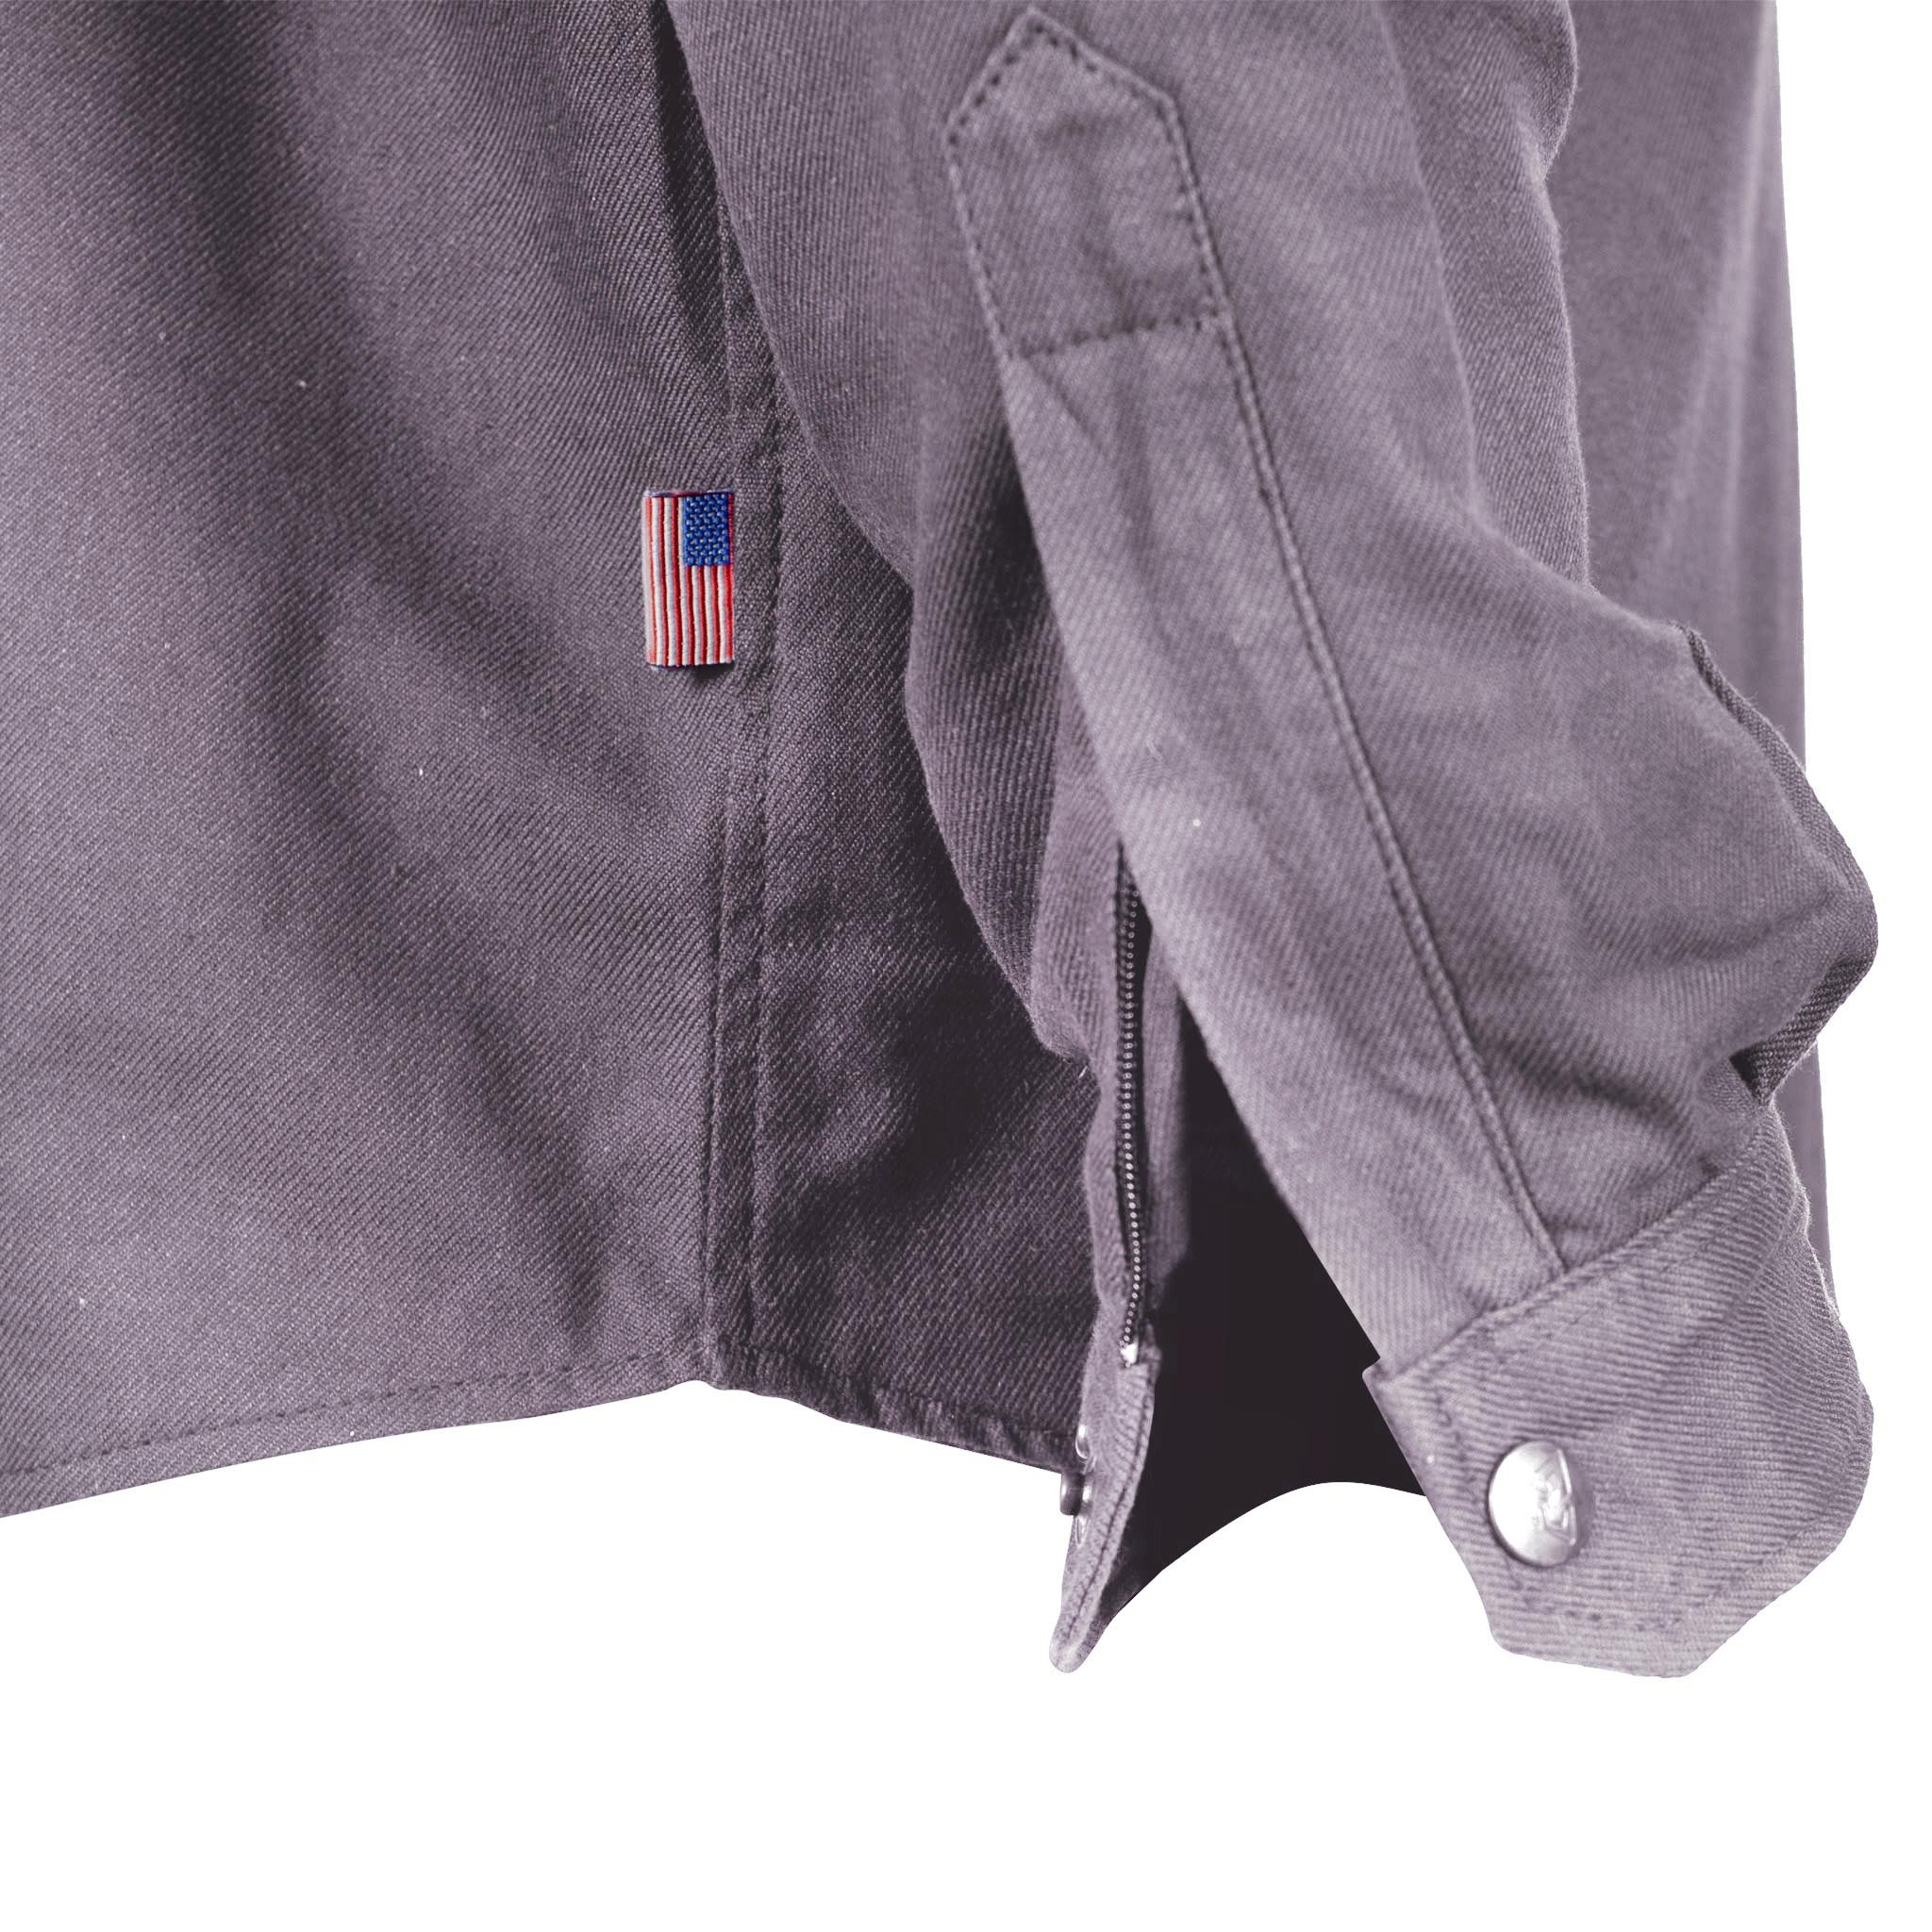 Protective Flannel Shirt - Grey Solid with Pads